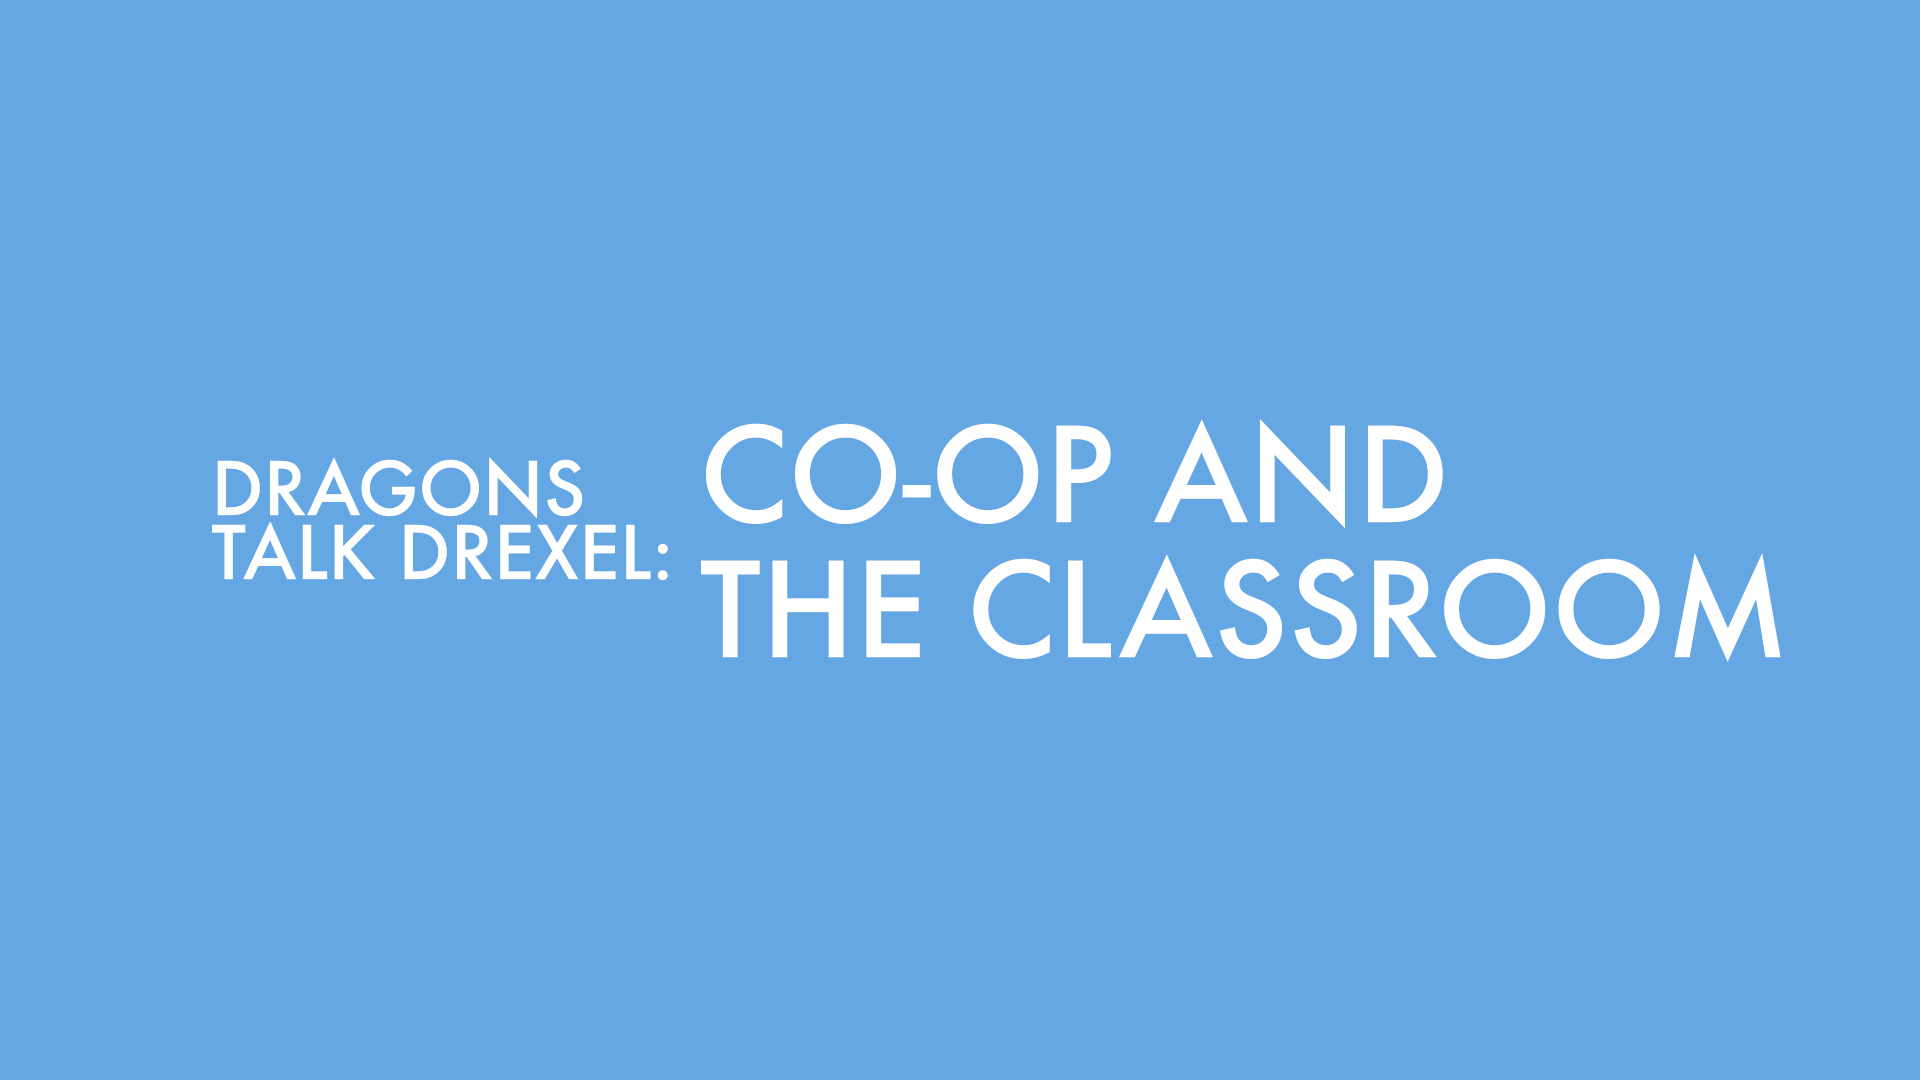 Dragons Talk Drexel: Co-op and the Classroom